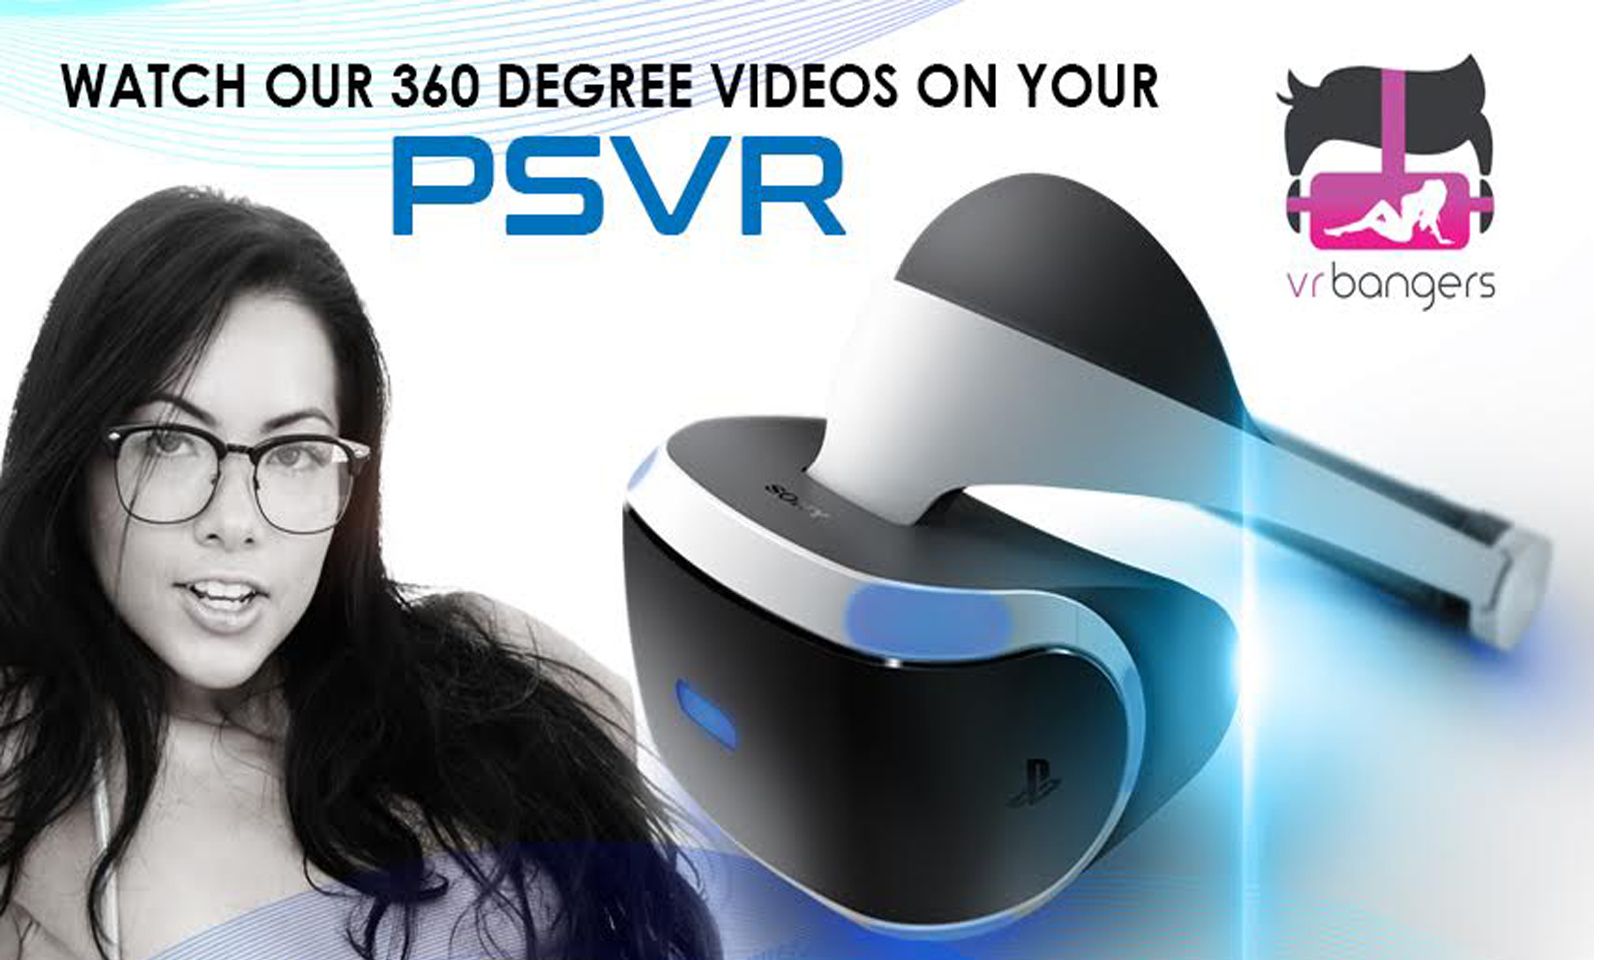 VR Bangers Releases First Hack for PSVR Stereoscopic 3D Videos